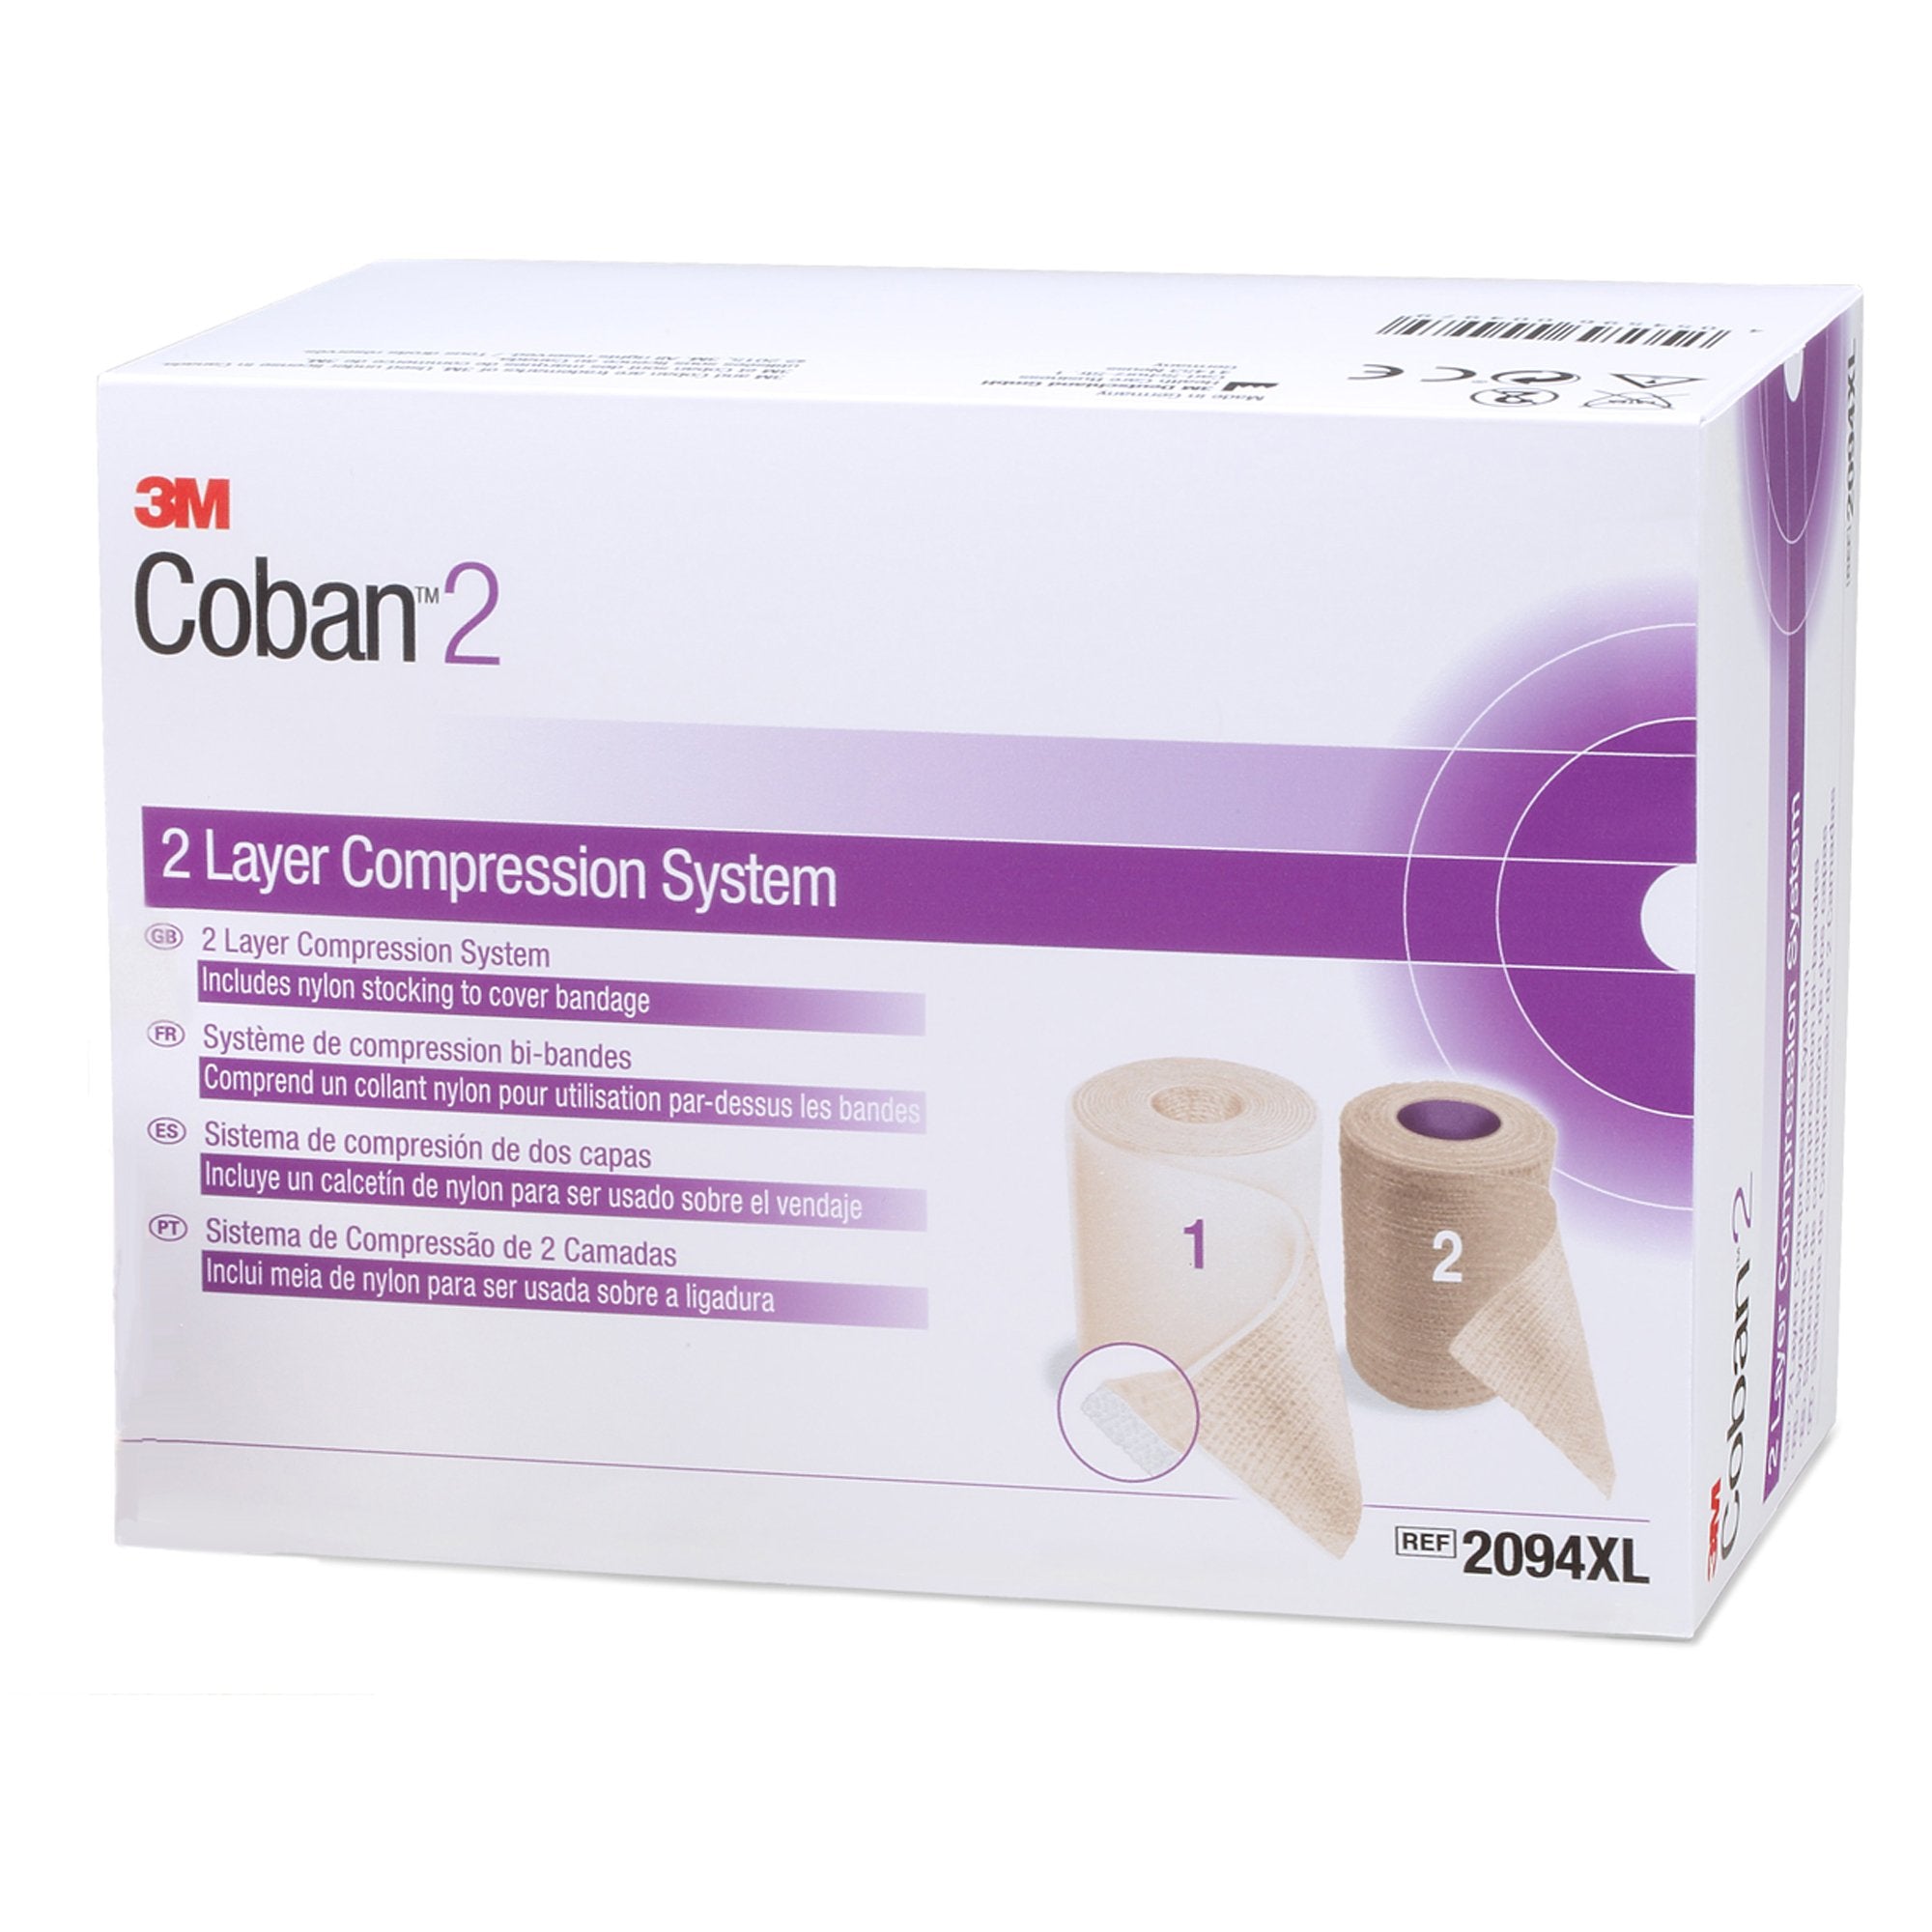 2 Layer Compression Bandage System 3M™ Coban™ 2 4 Inch X 3-4/5 Yard / 4 Inch X 6-3/10 Yard Self-Adherent / Pull On Closure Tan / White NonSterile 35 to 40 mmHg